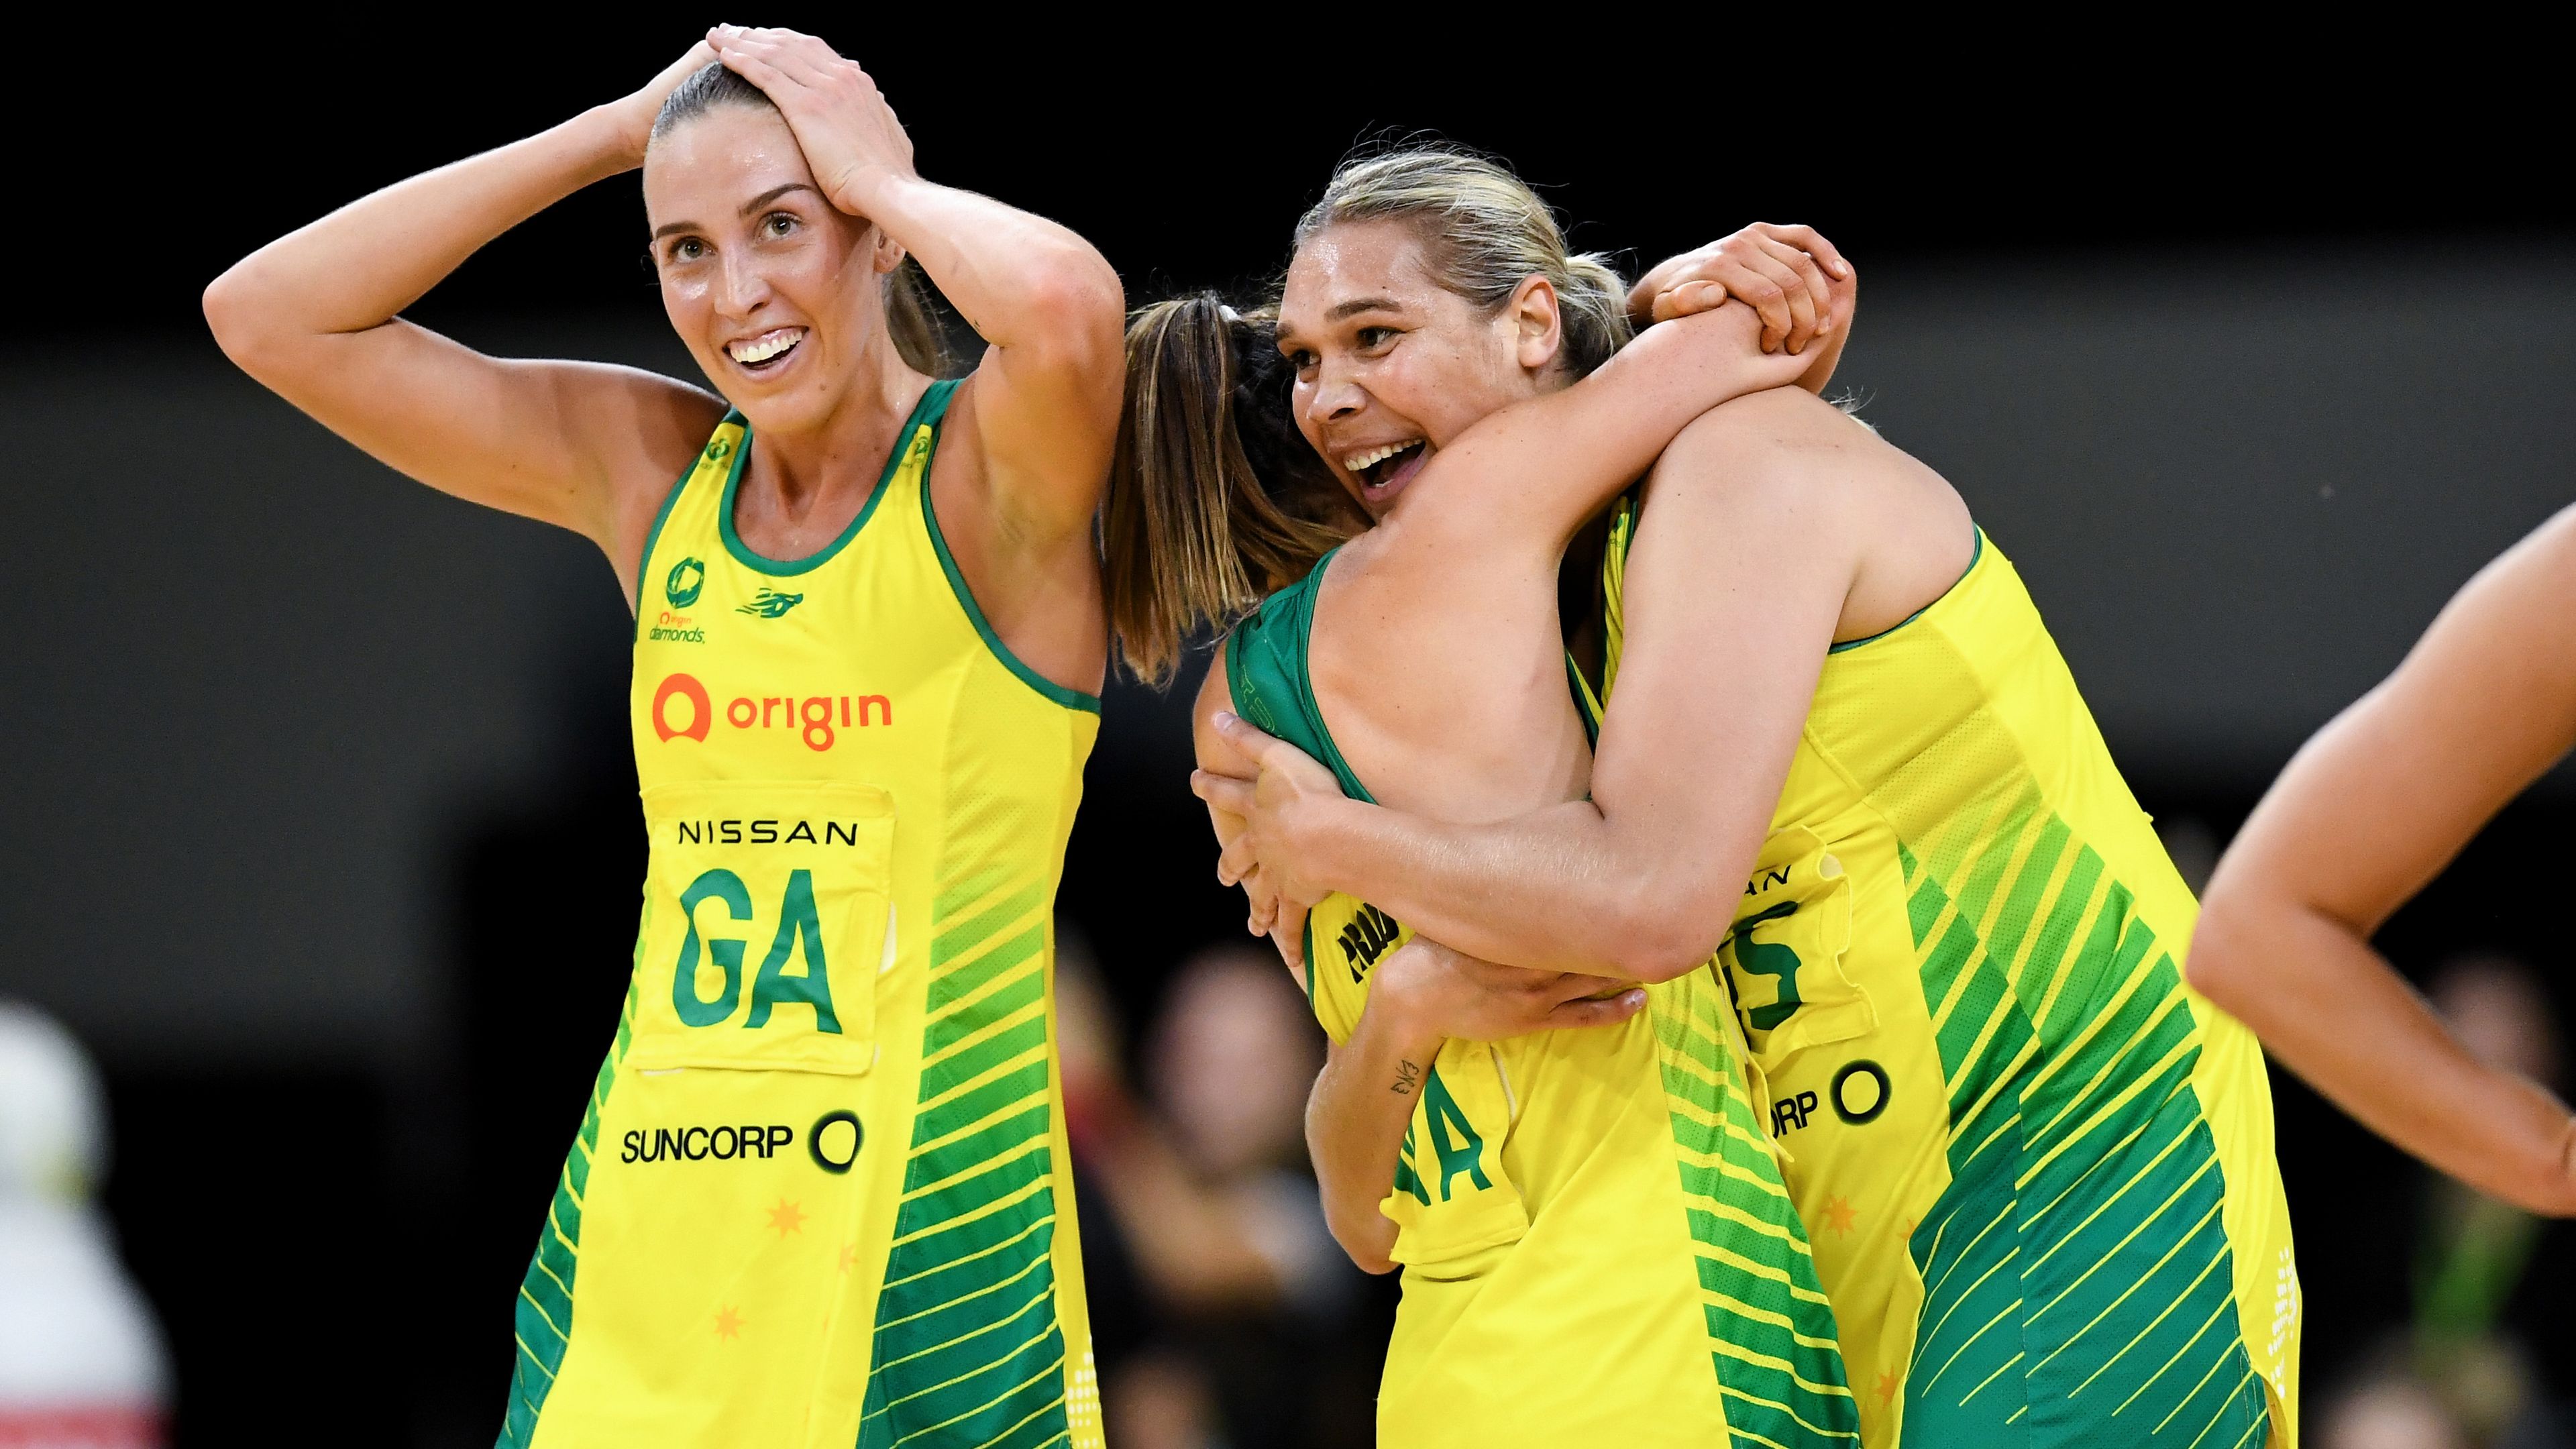 Donnell Wallam of the Australia Diamonds and Maddy Proud of the Australia Diamonds  hug after the Netball International match between Australia and England on October 26, 2022 at Newcastle Entertainment Centre in Newcastle, Australia. (Photo by Steven Markham/Speed Media/Icon Sportswire)